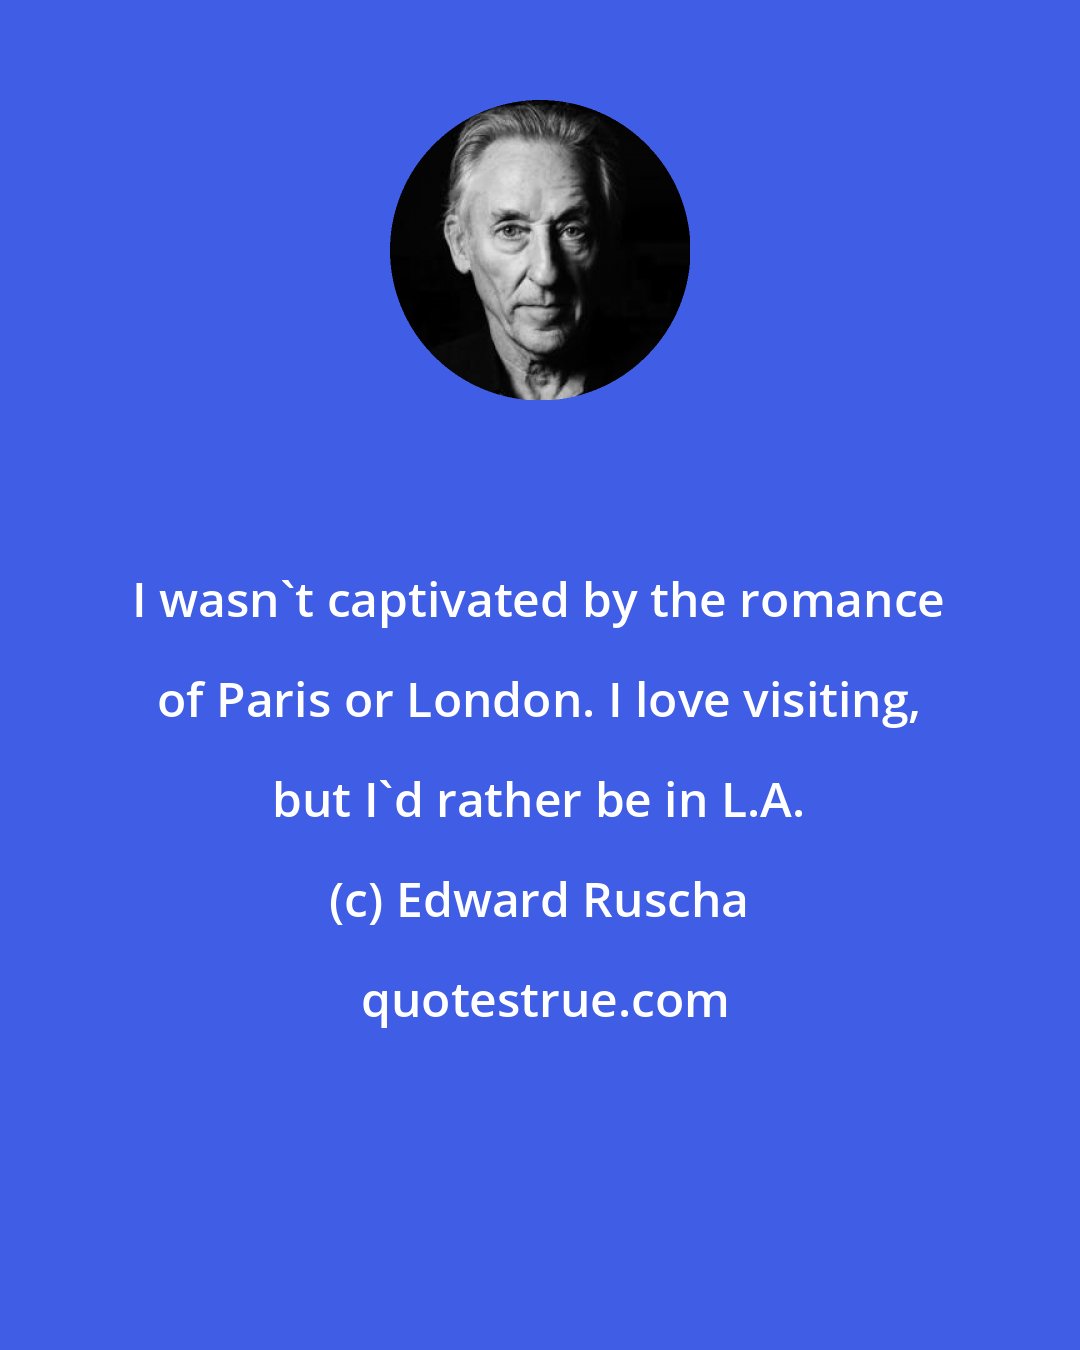 Edward Ruscha: I wasn't captivated by the romance of Paris or London. I love visiting, but I'd rather be in L.A.